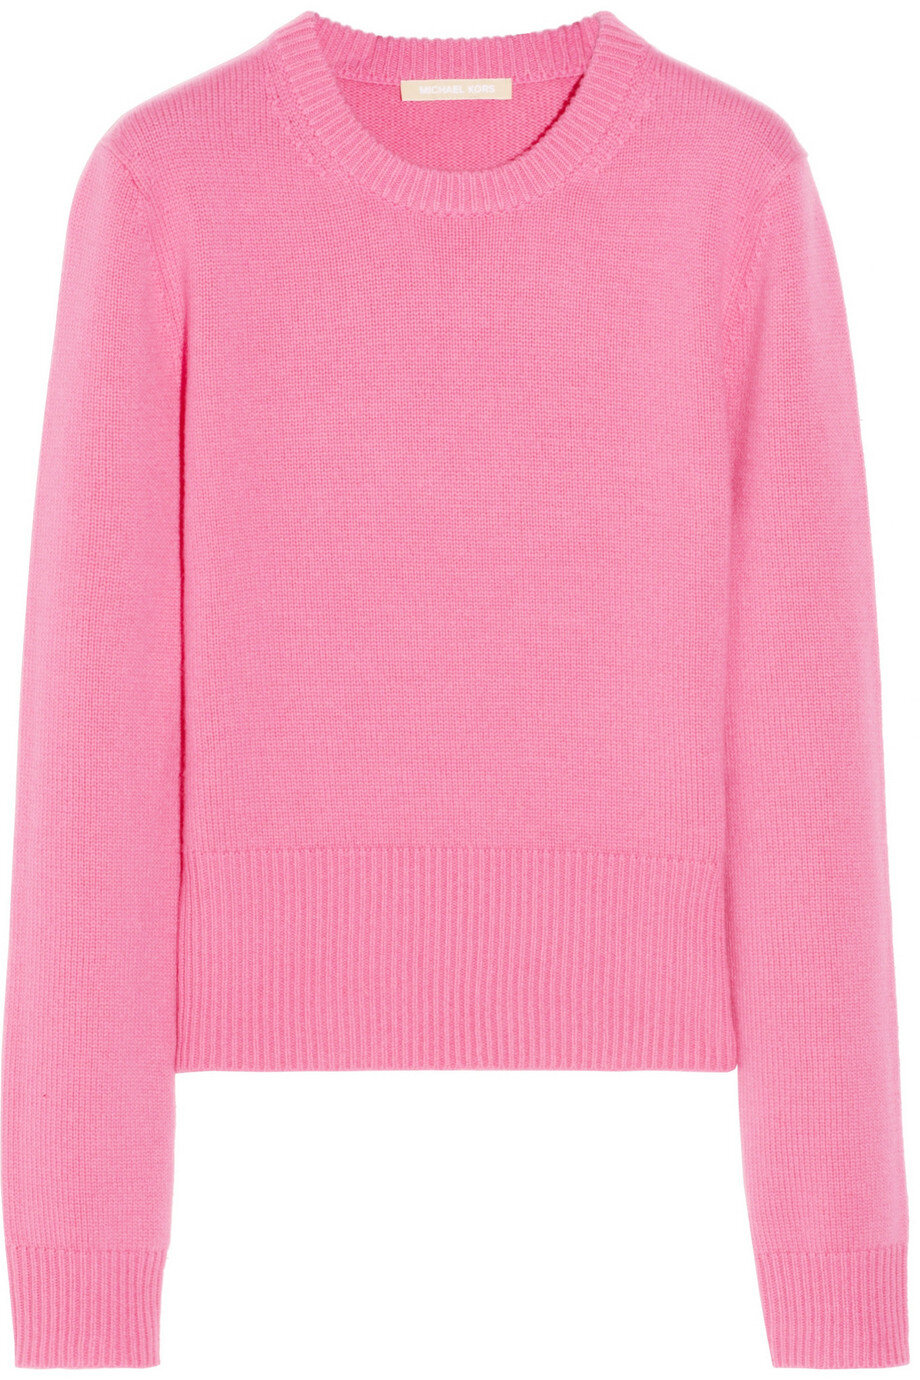 Michael Kors Cashmere Sweater in Pink — UFO No More